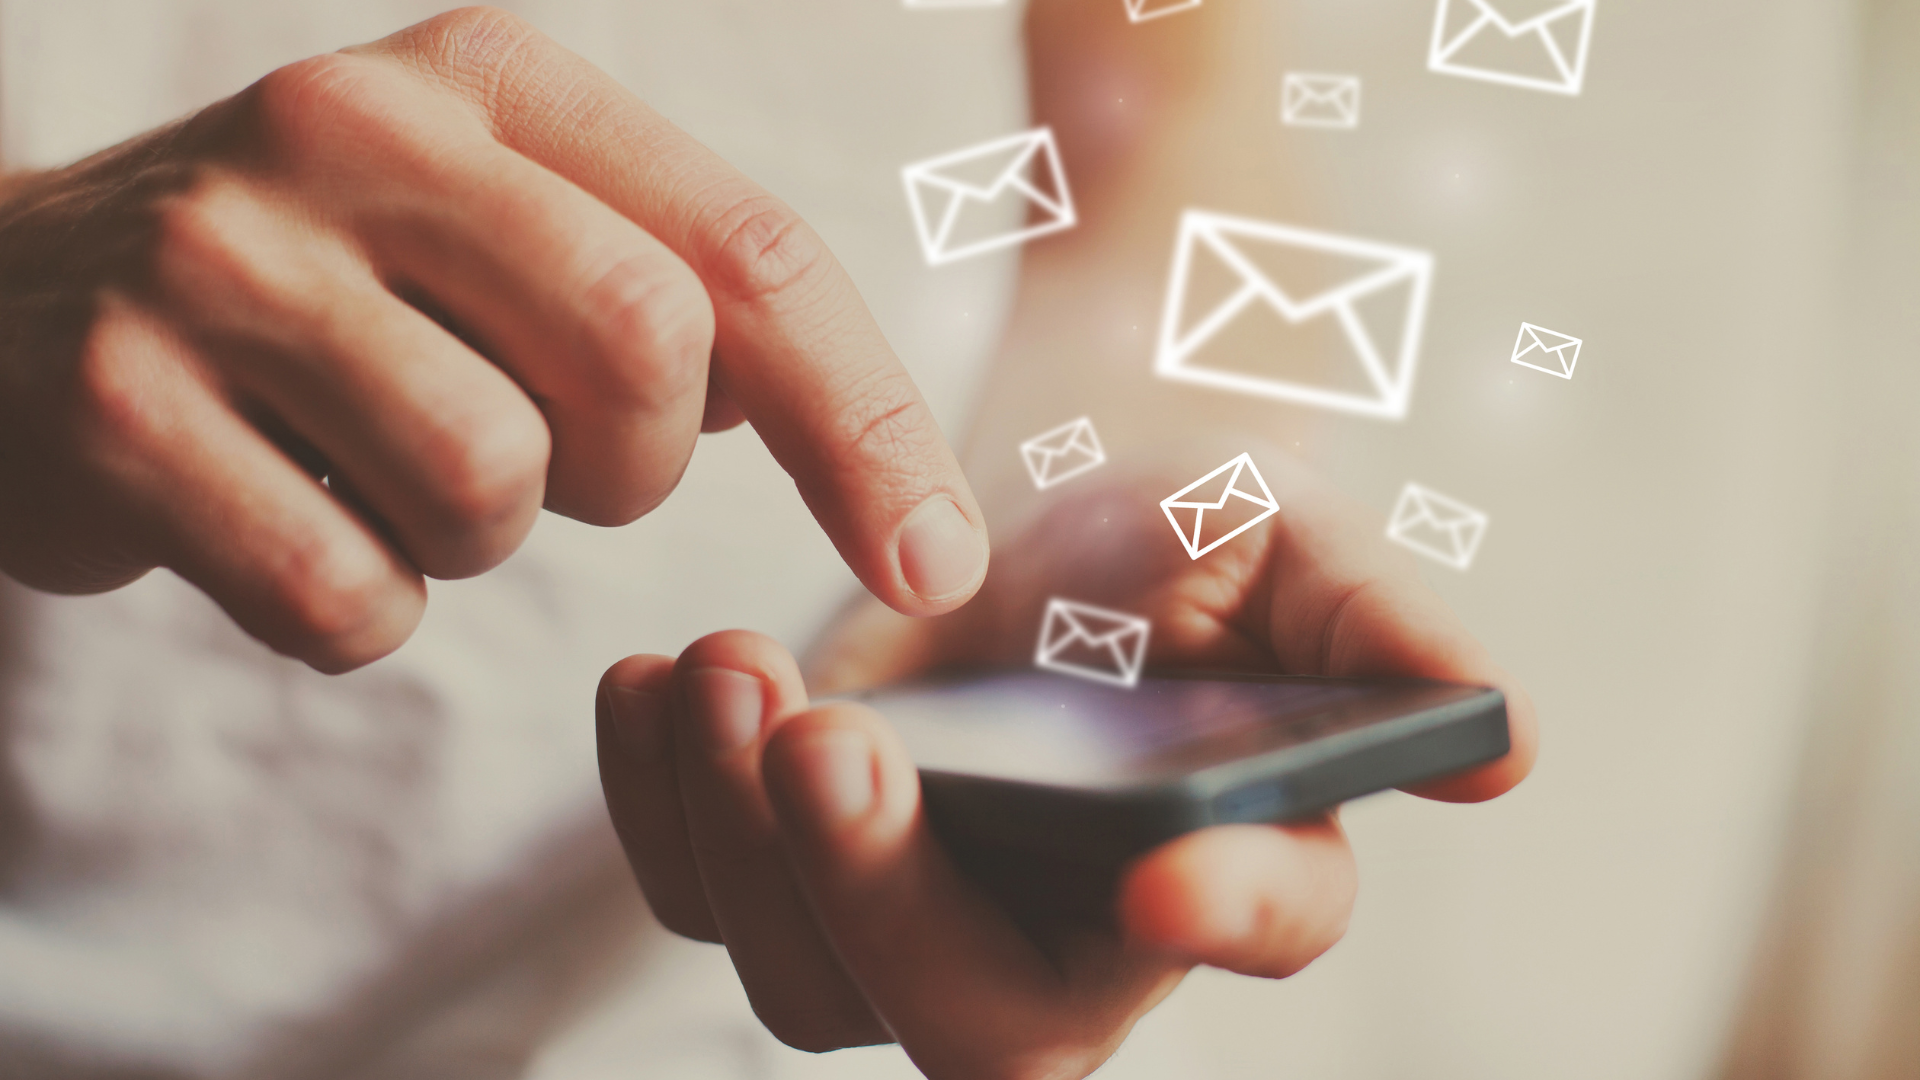 Send emails on a mobile phone